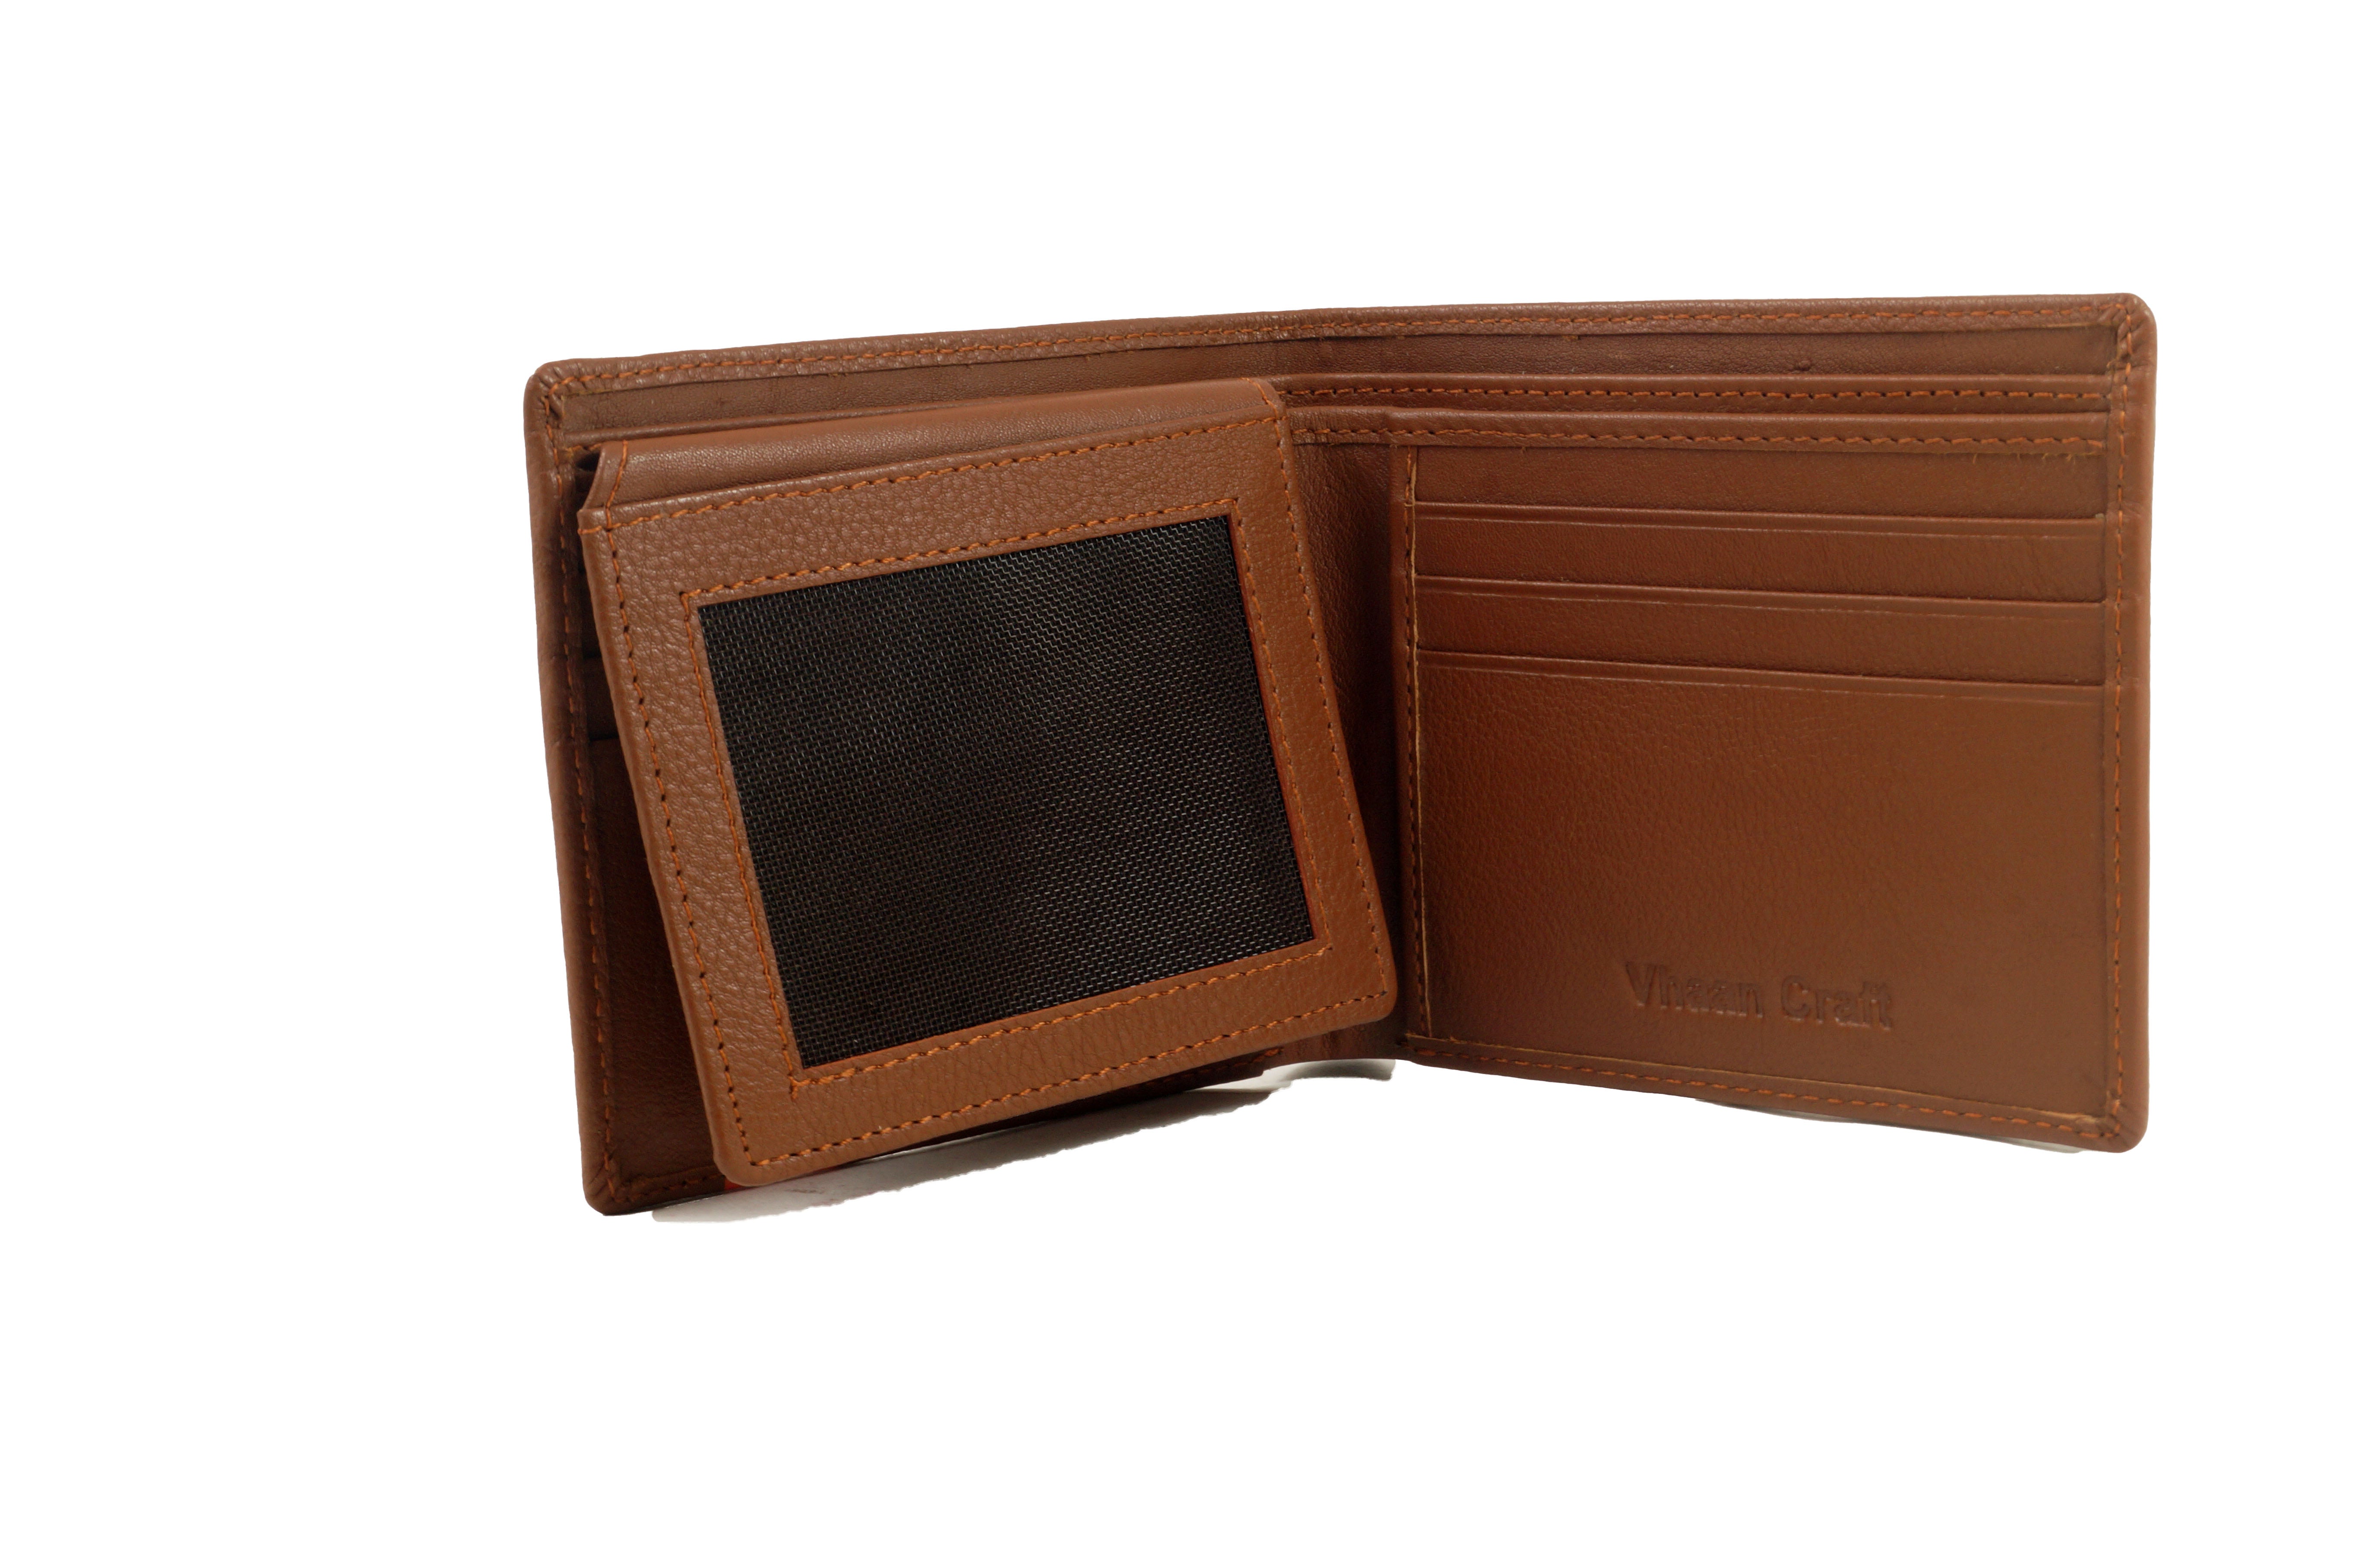 Style Guardian: Premium NAPPA Leather Wallet with RFID Protection for Men - Tan